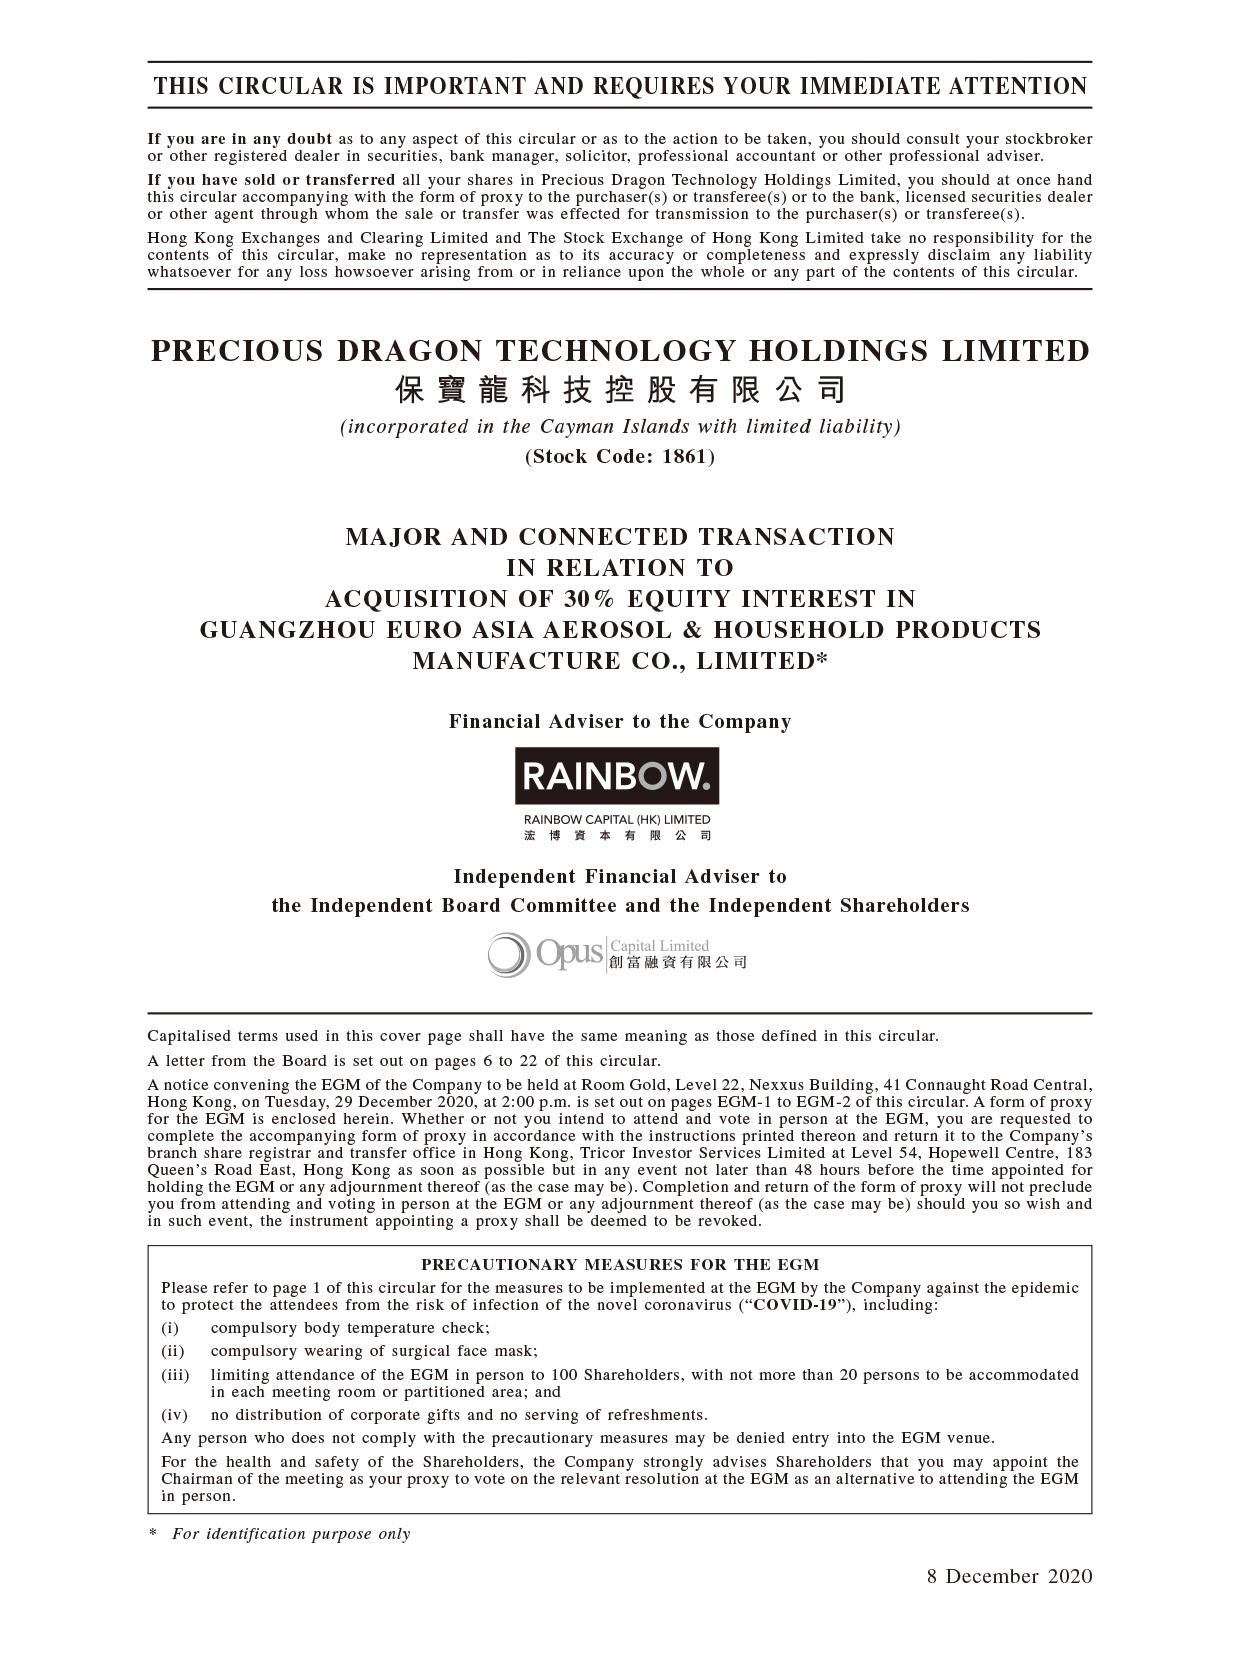 Precious Dragon Technology Holdings Limited